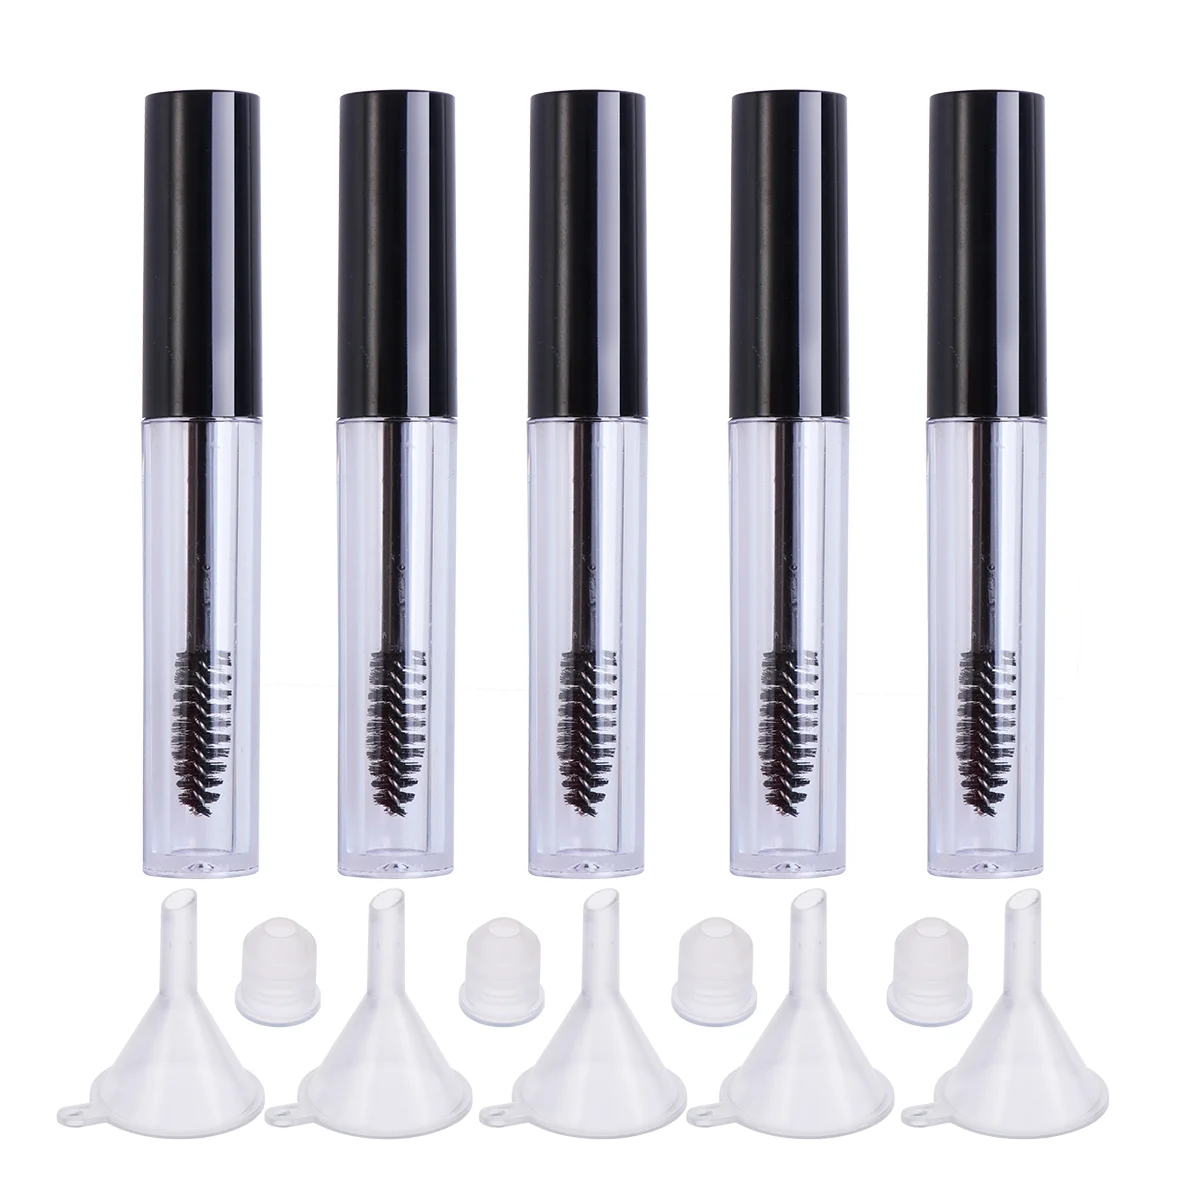 

5pcs 3.5ml Mascara Container with Brush Eyelashes with 5 Rubber Inserts and 5 Funnels